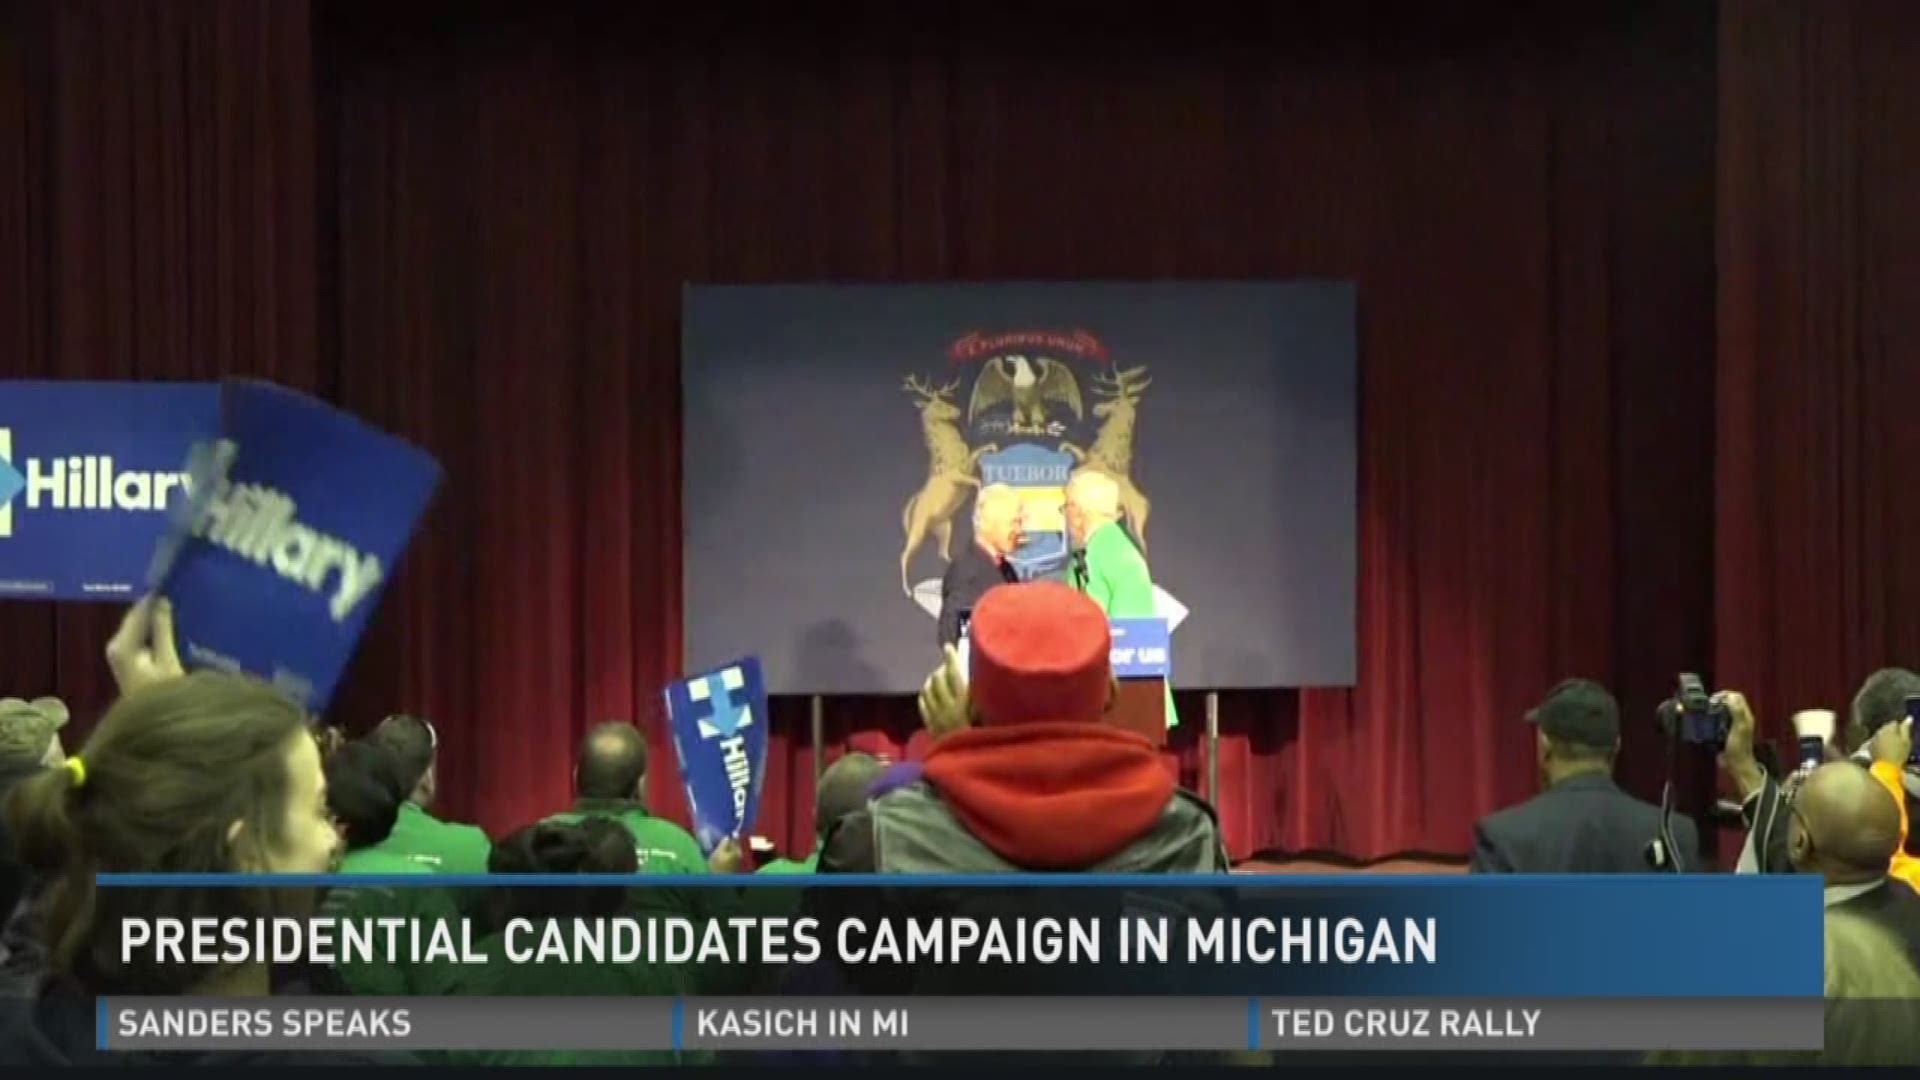 This weekend, Michigan seems to be at the center of the political world.